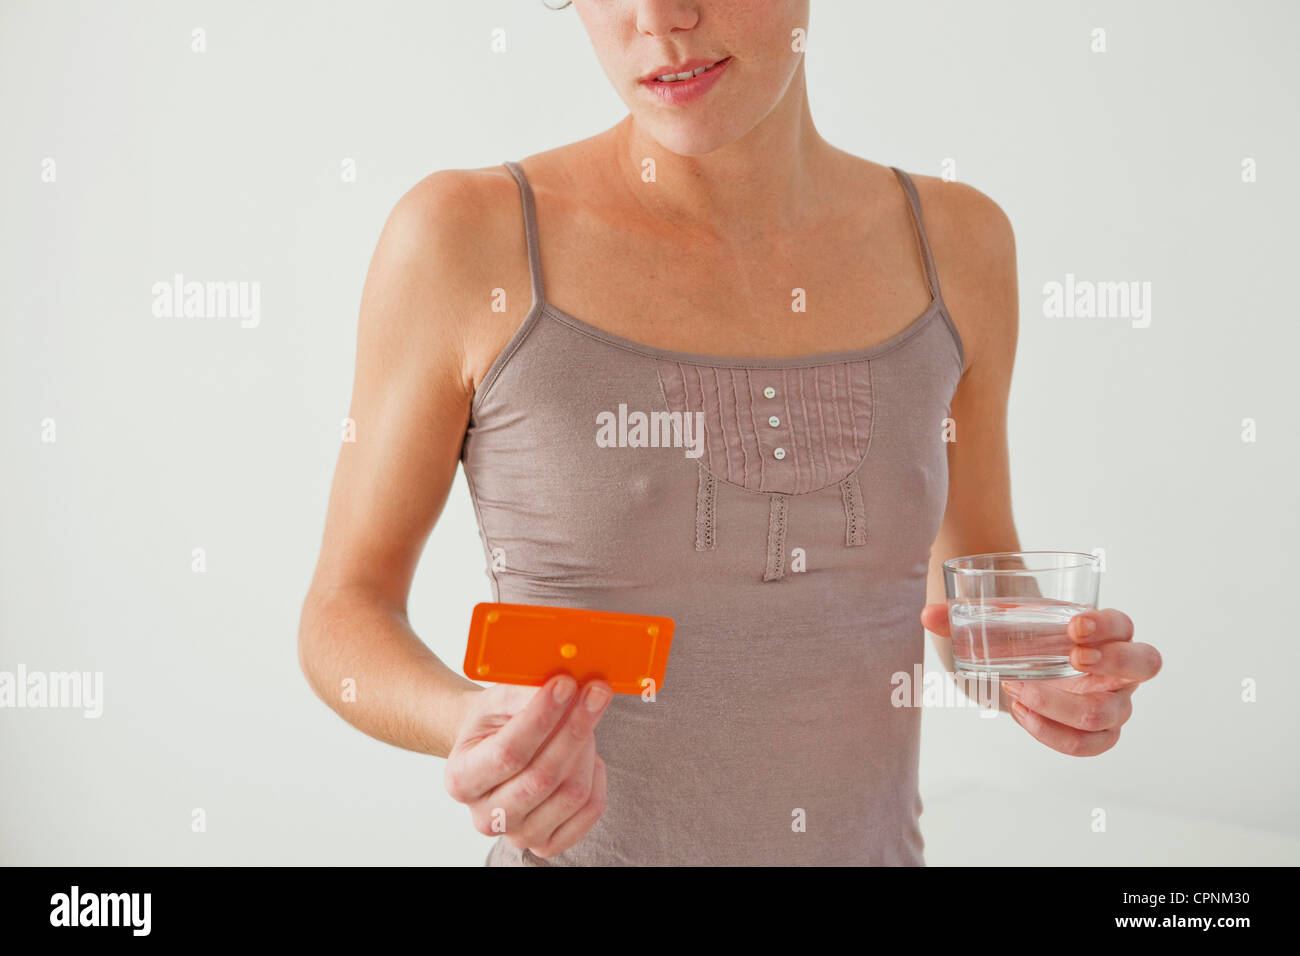 MORNING-AFTER PILL Stock Photo